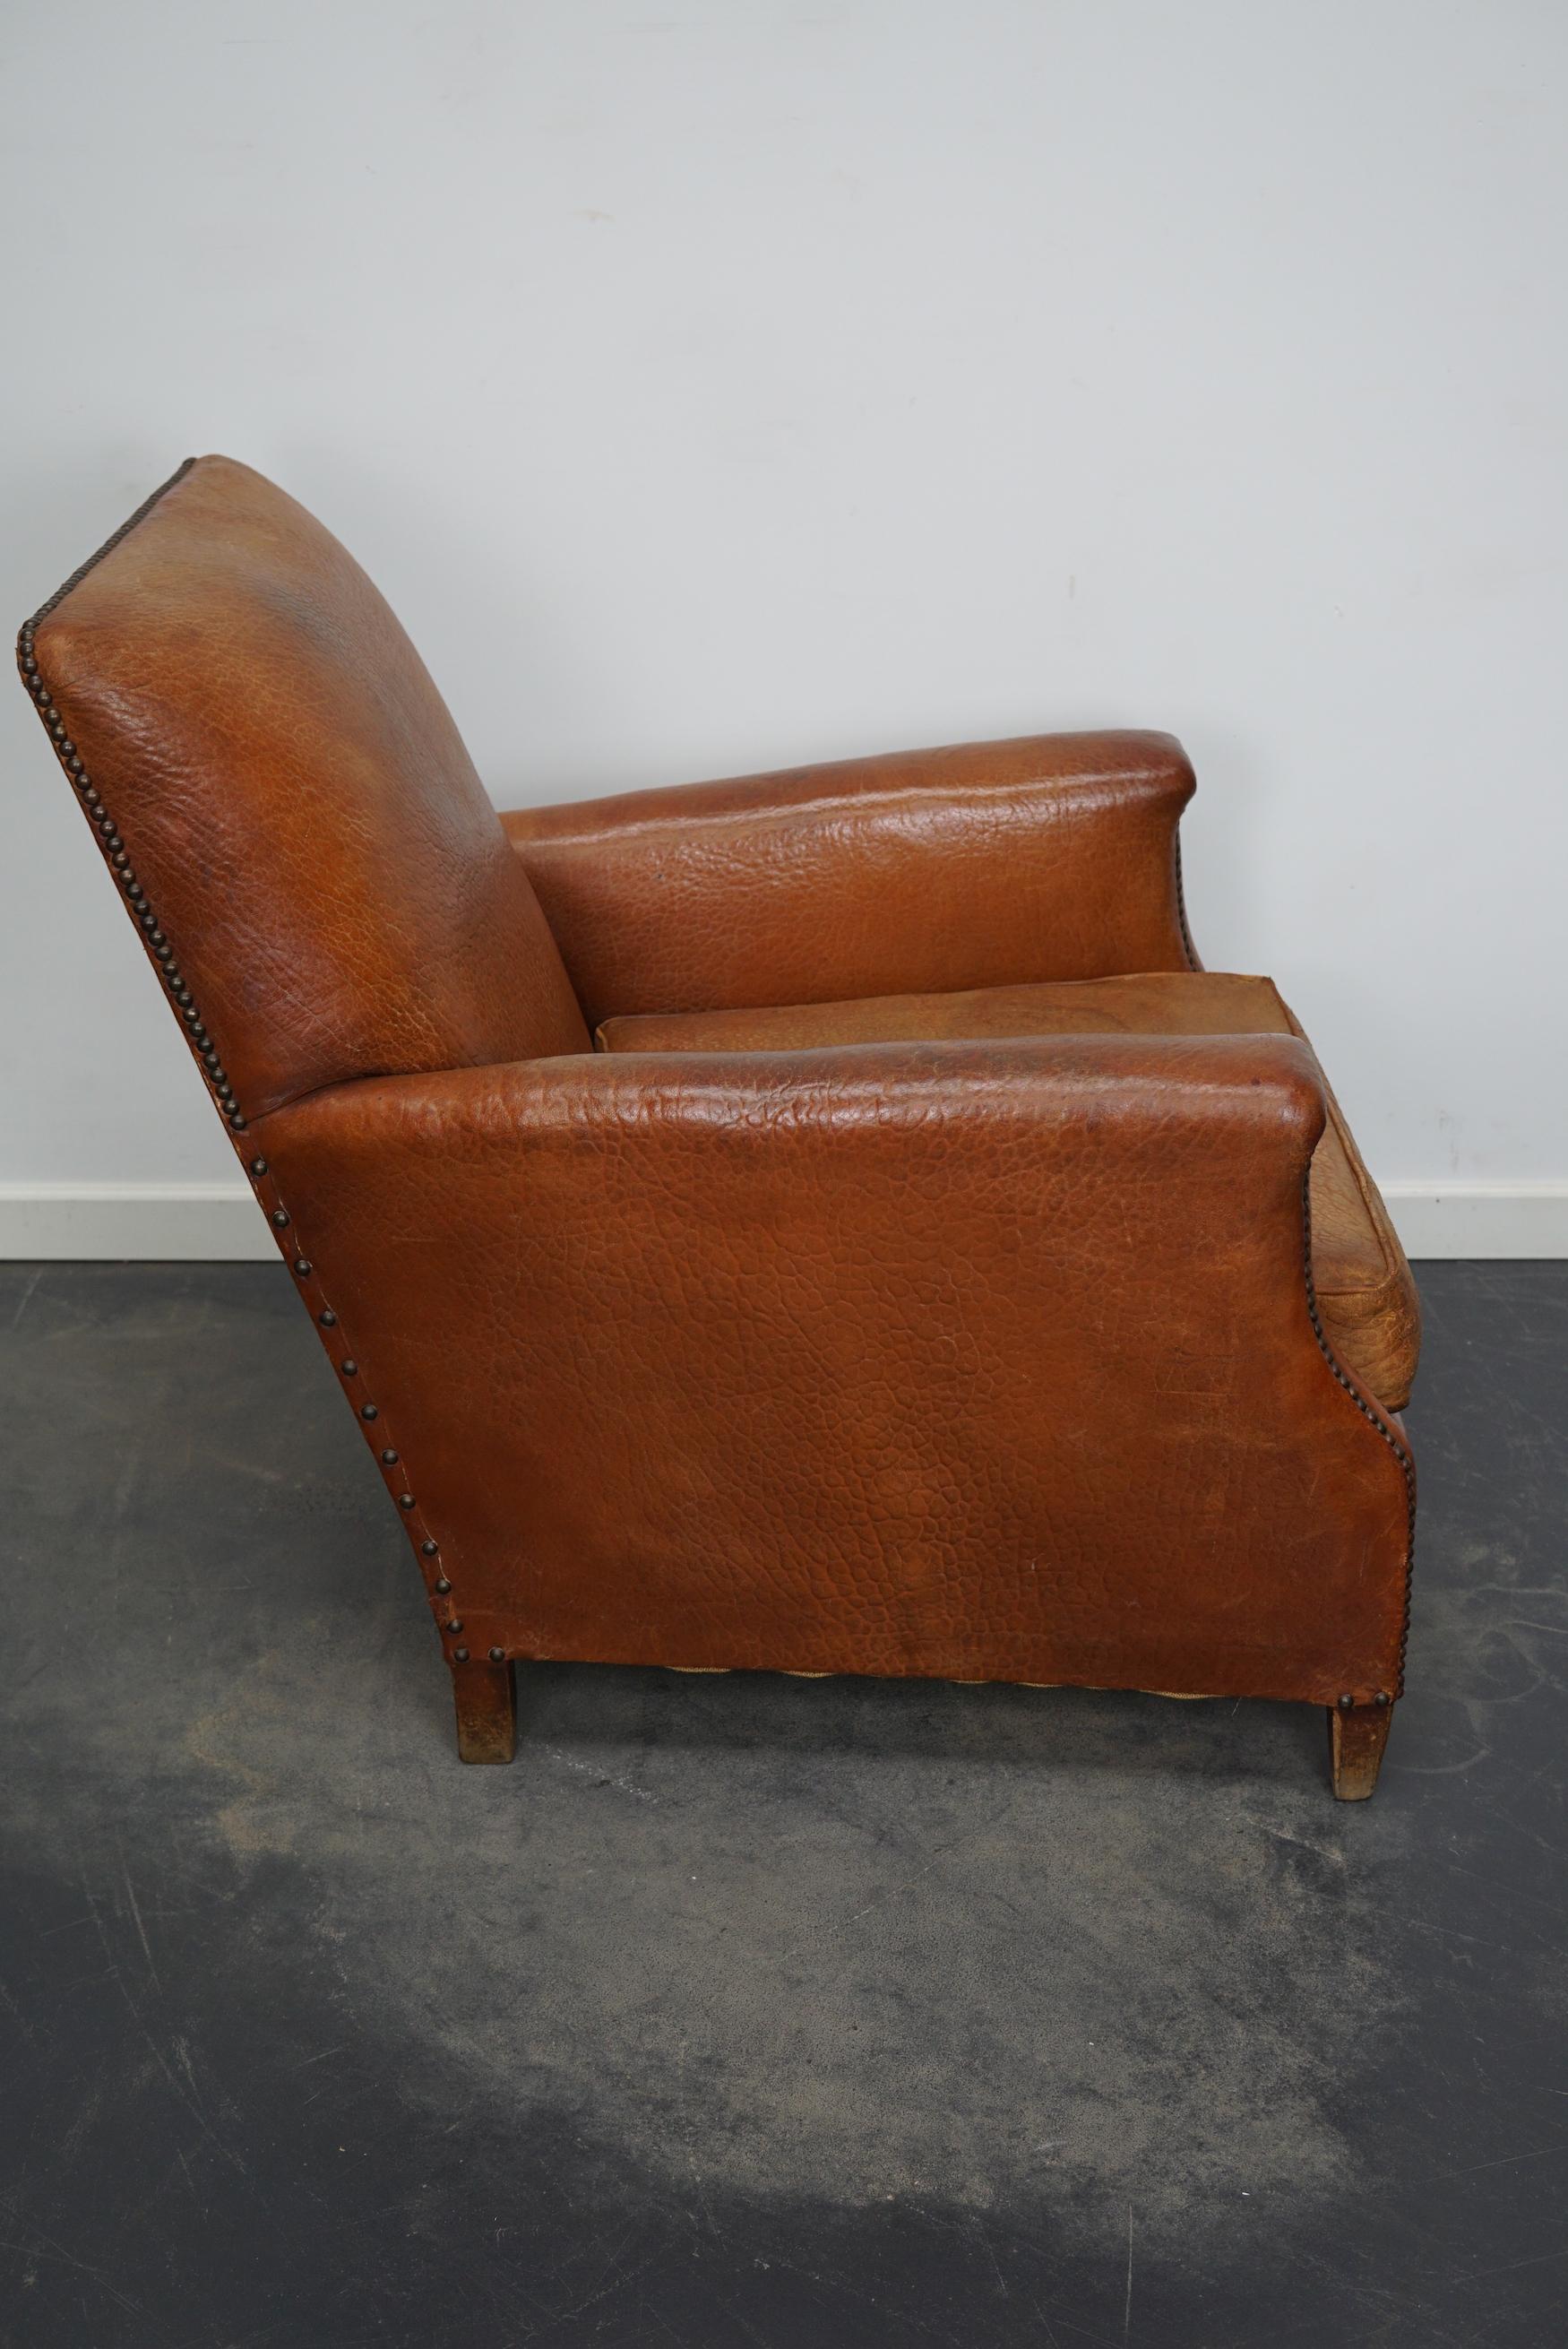 Mid-20th Century Vintage French Cognac-Colored Leather Club Chair, 1940s For Sale